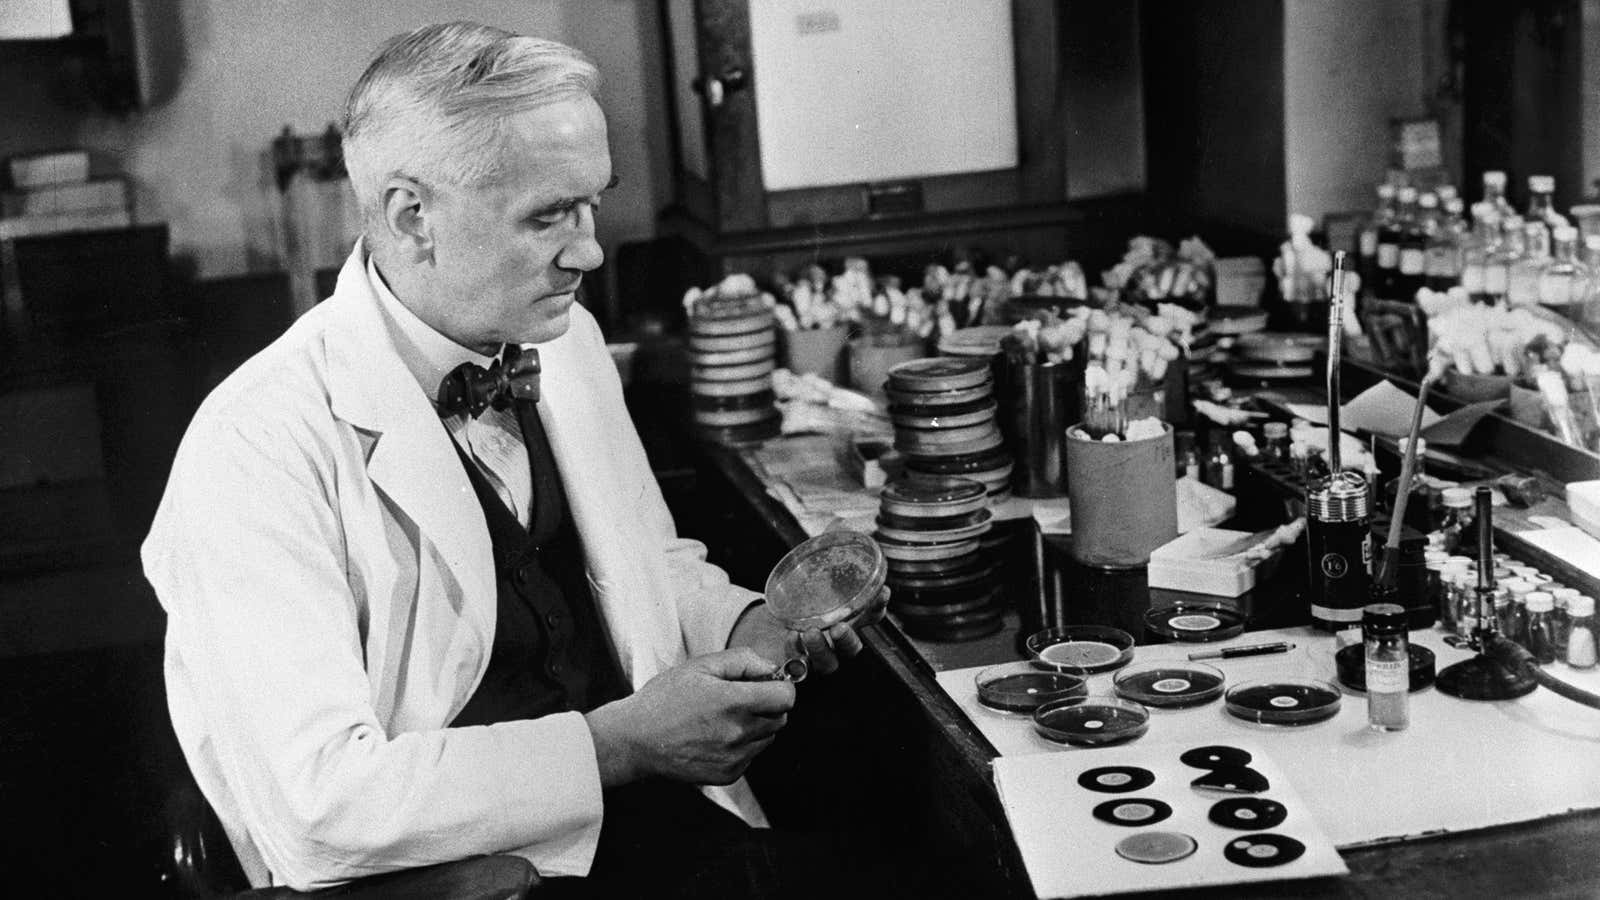 Sir Alexander Fleming’s penicillin is no match for new superbugs